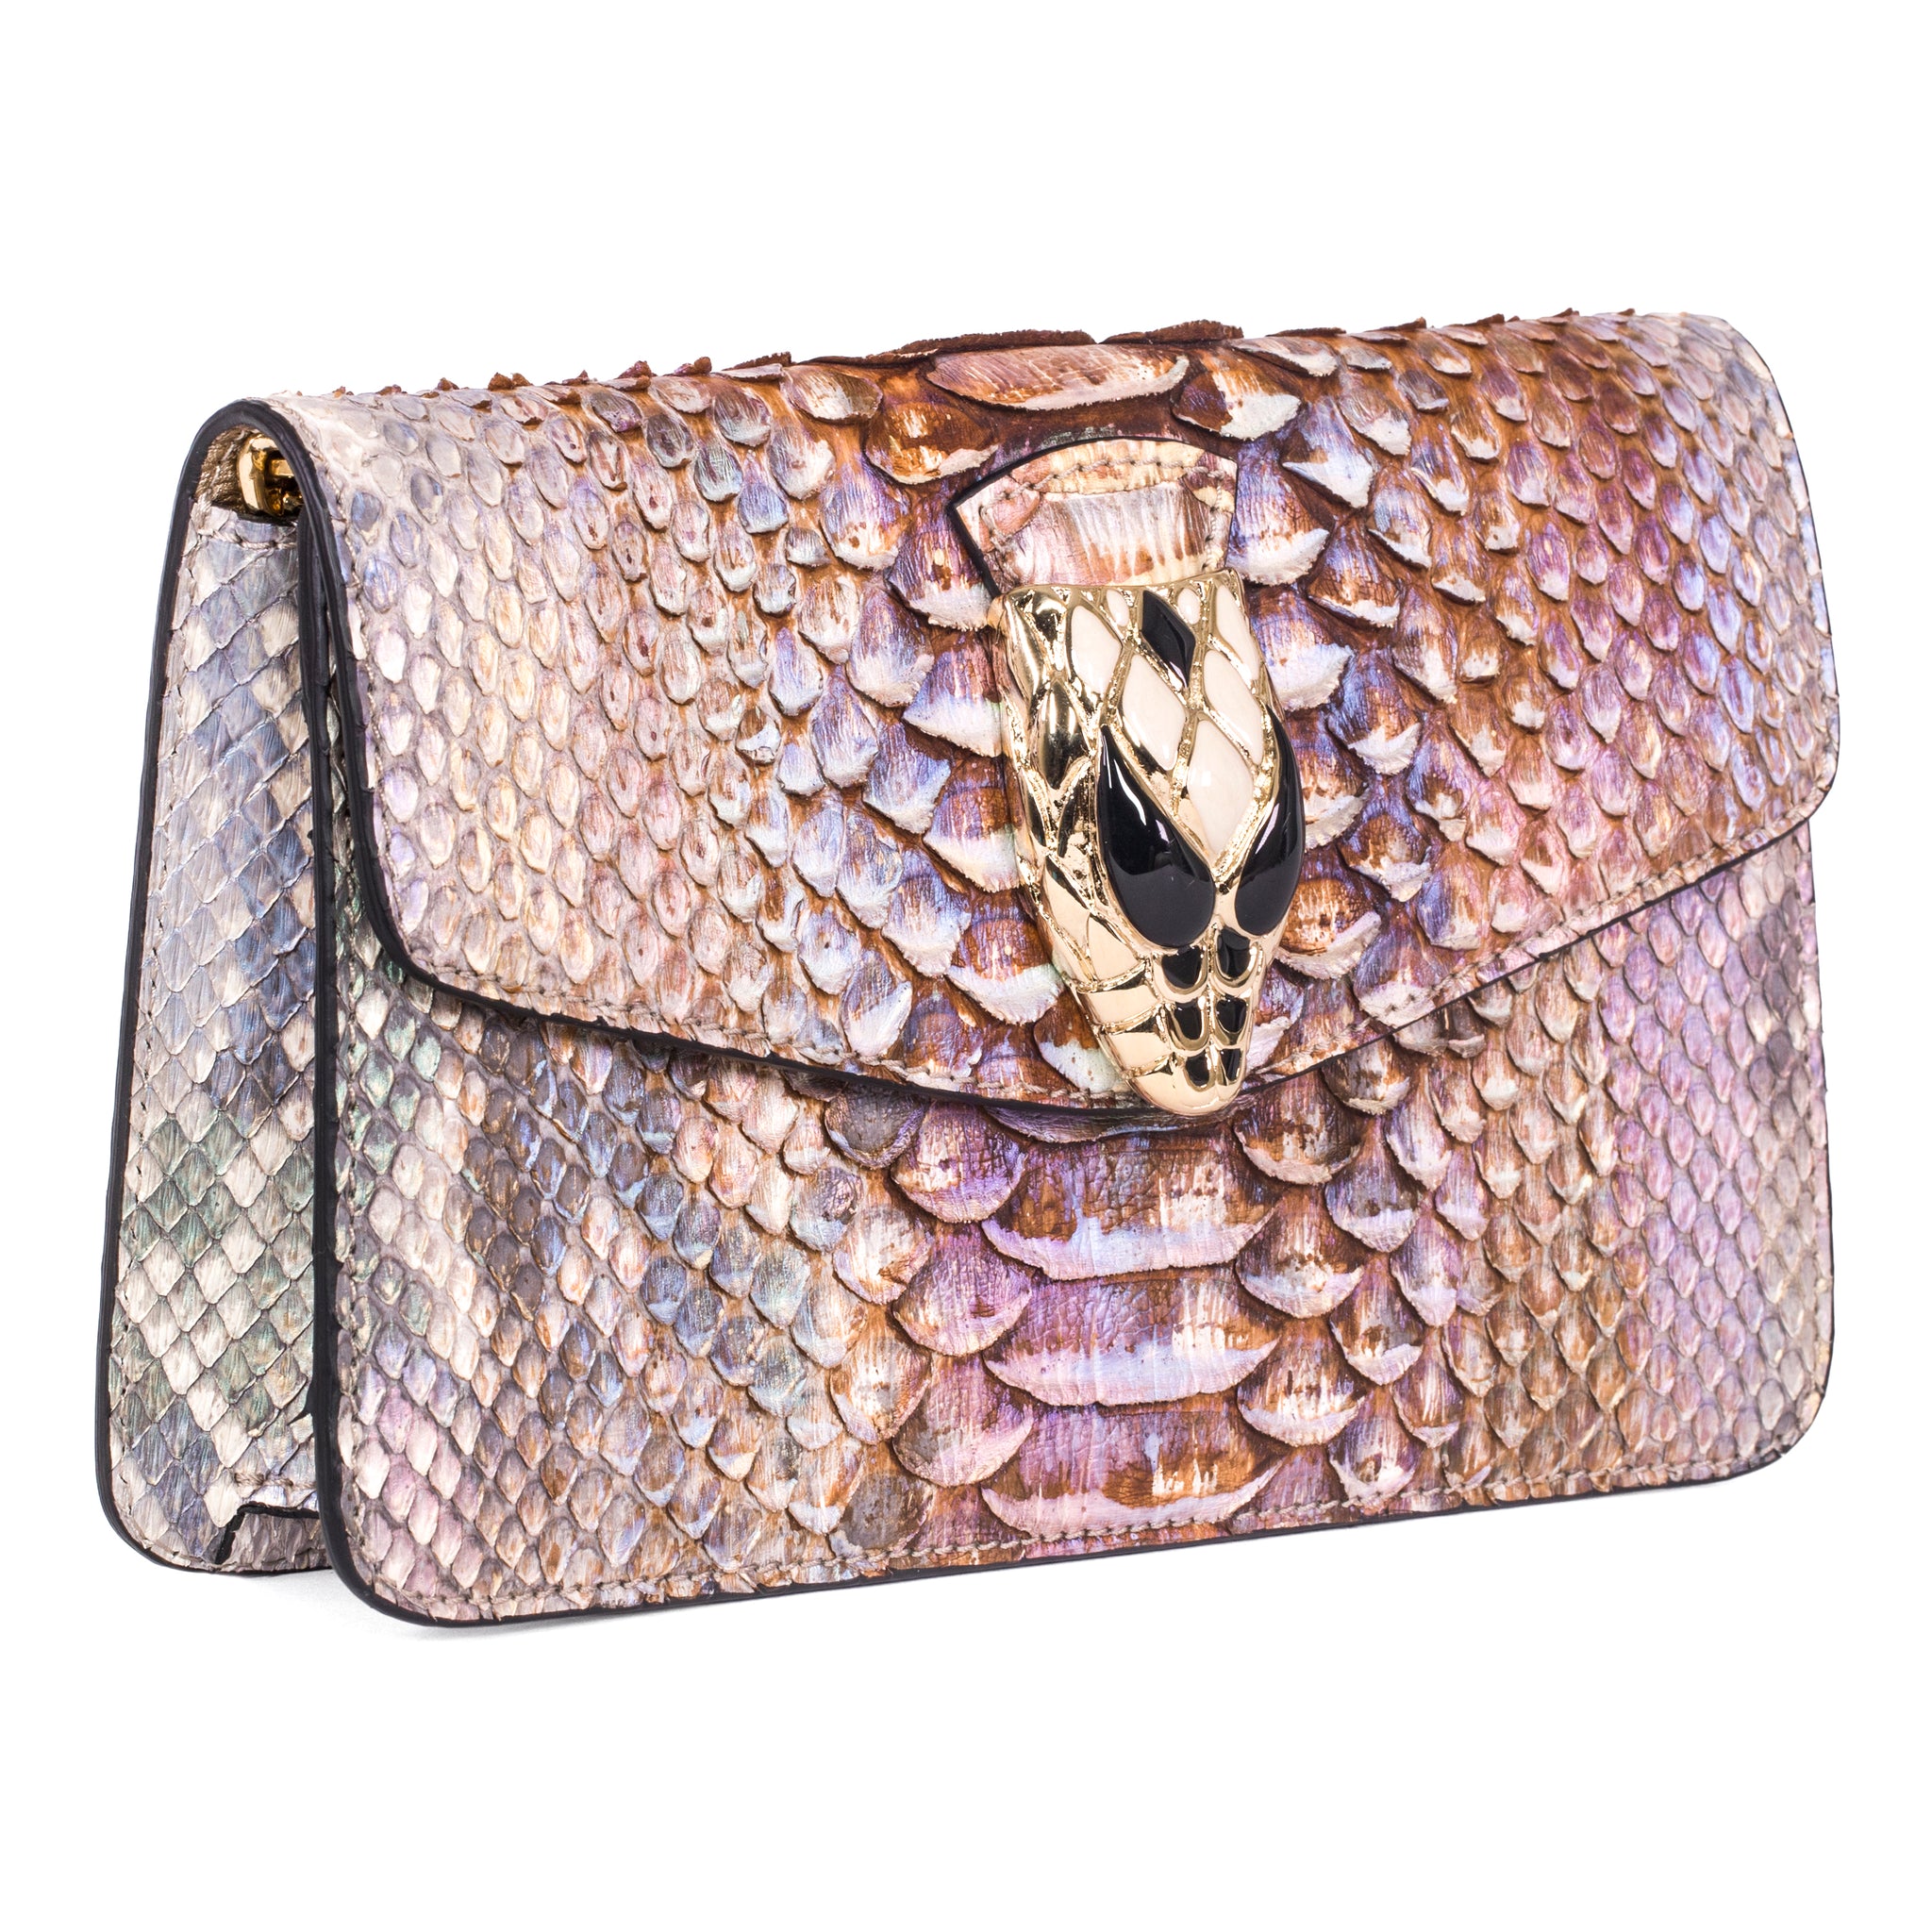 Light Luxury Pearl Fish Skin Small Square Bag With Snake Head Buckle Chain  Fashionable Calf Leather Mini Side Bag For Women From Starlightboutique,  $81.97 | DHgate.Com